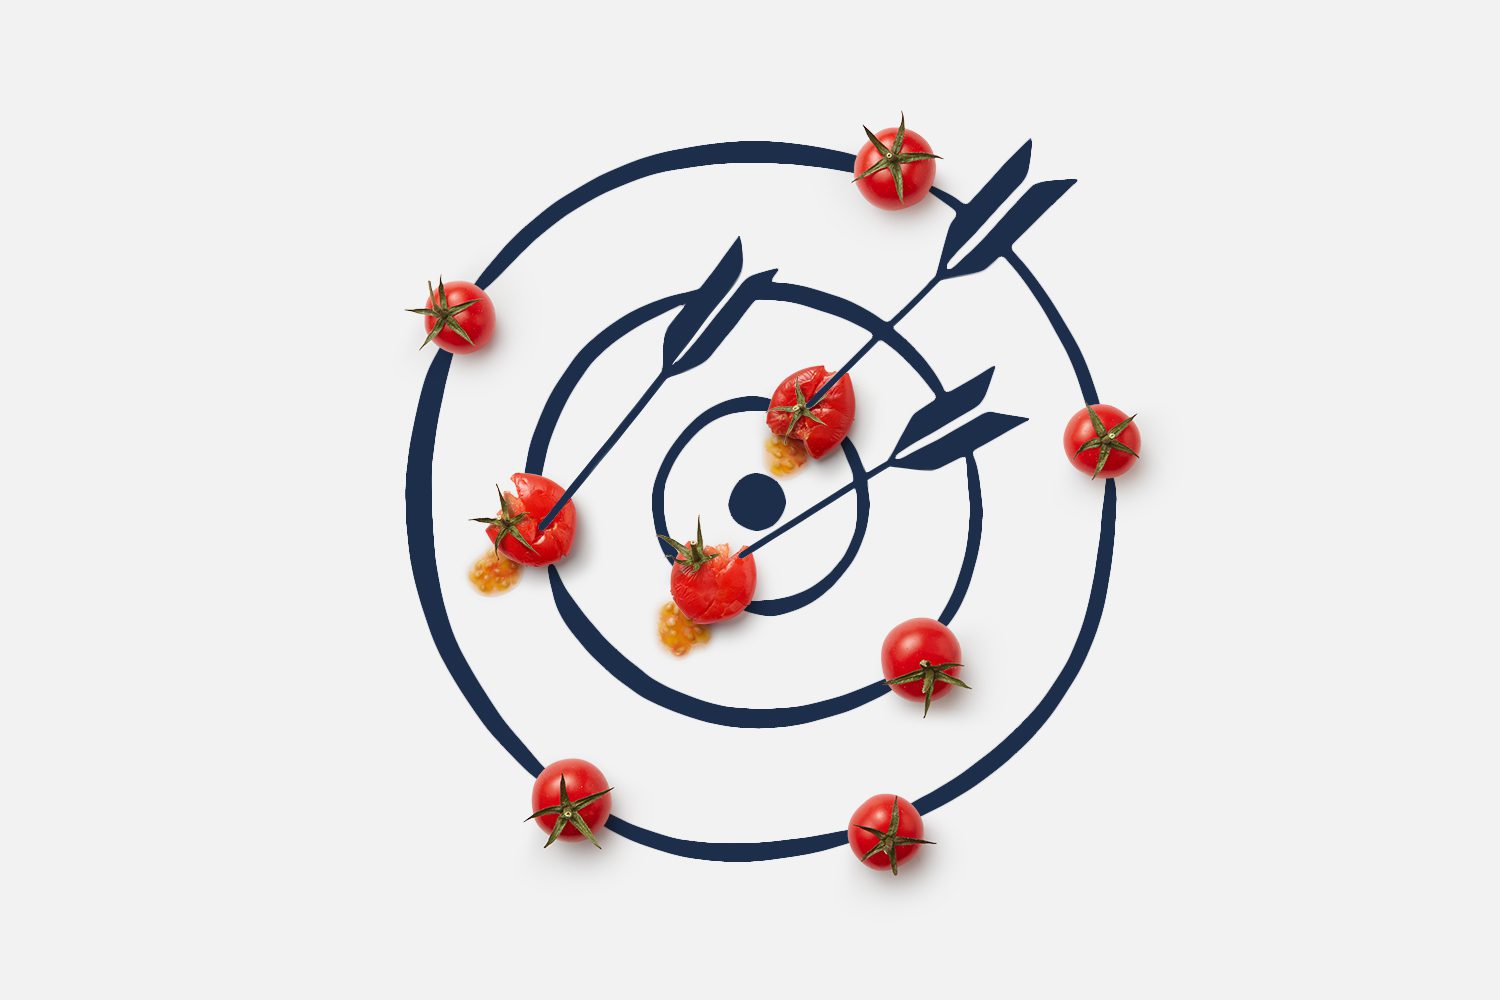 An illustration of a target with three arrows sticking out of it, with the arrows piercing cherry tomatoes